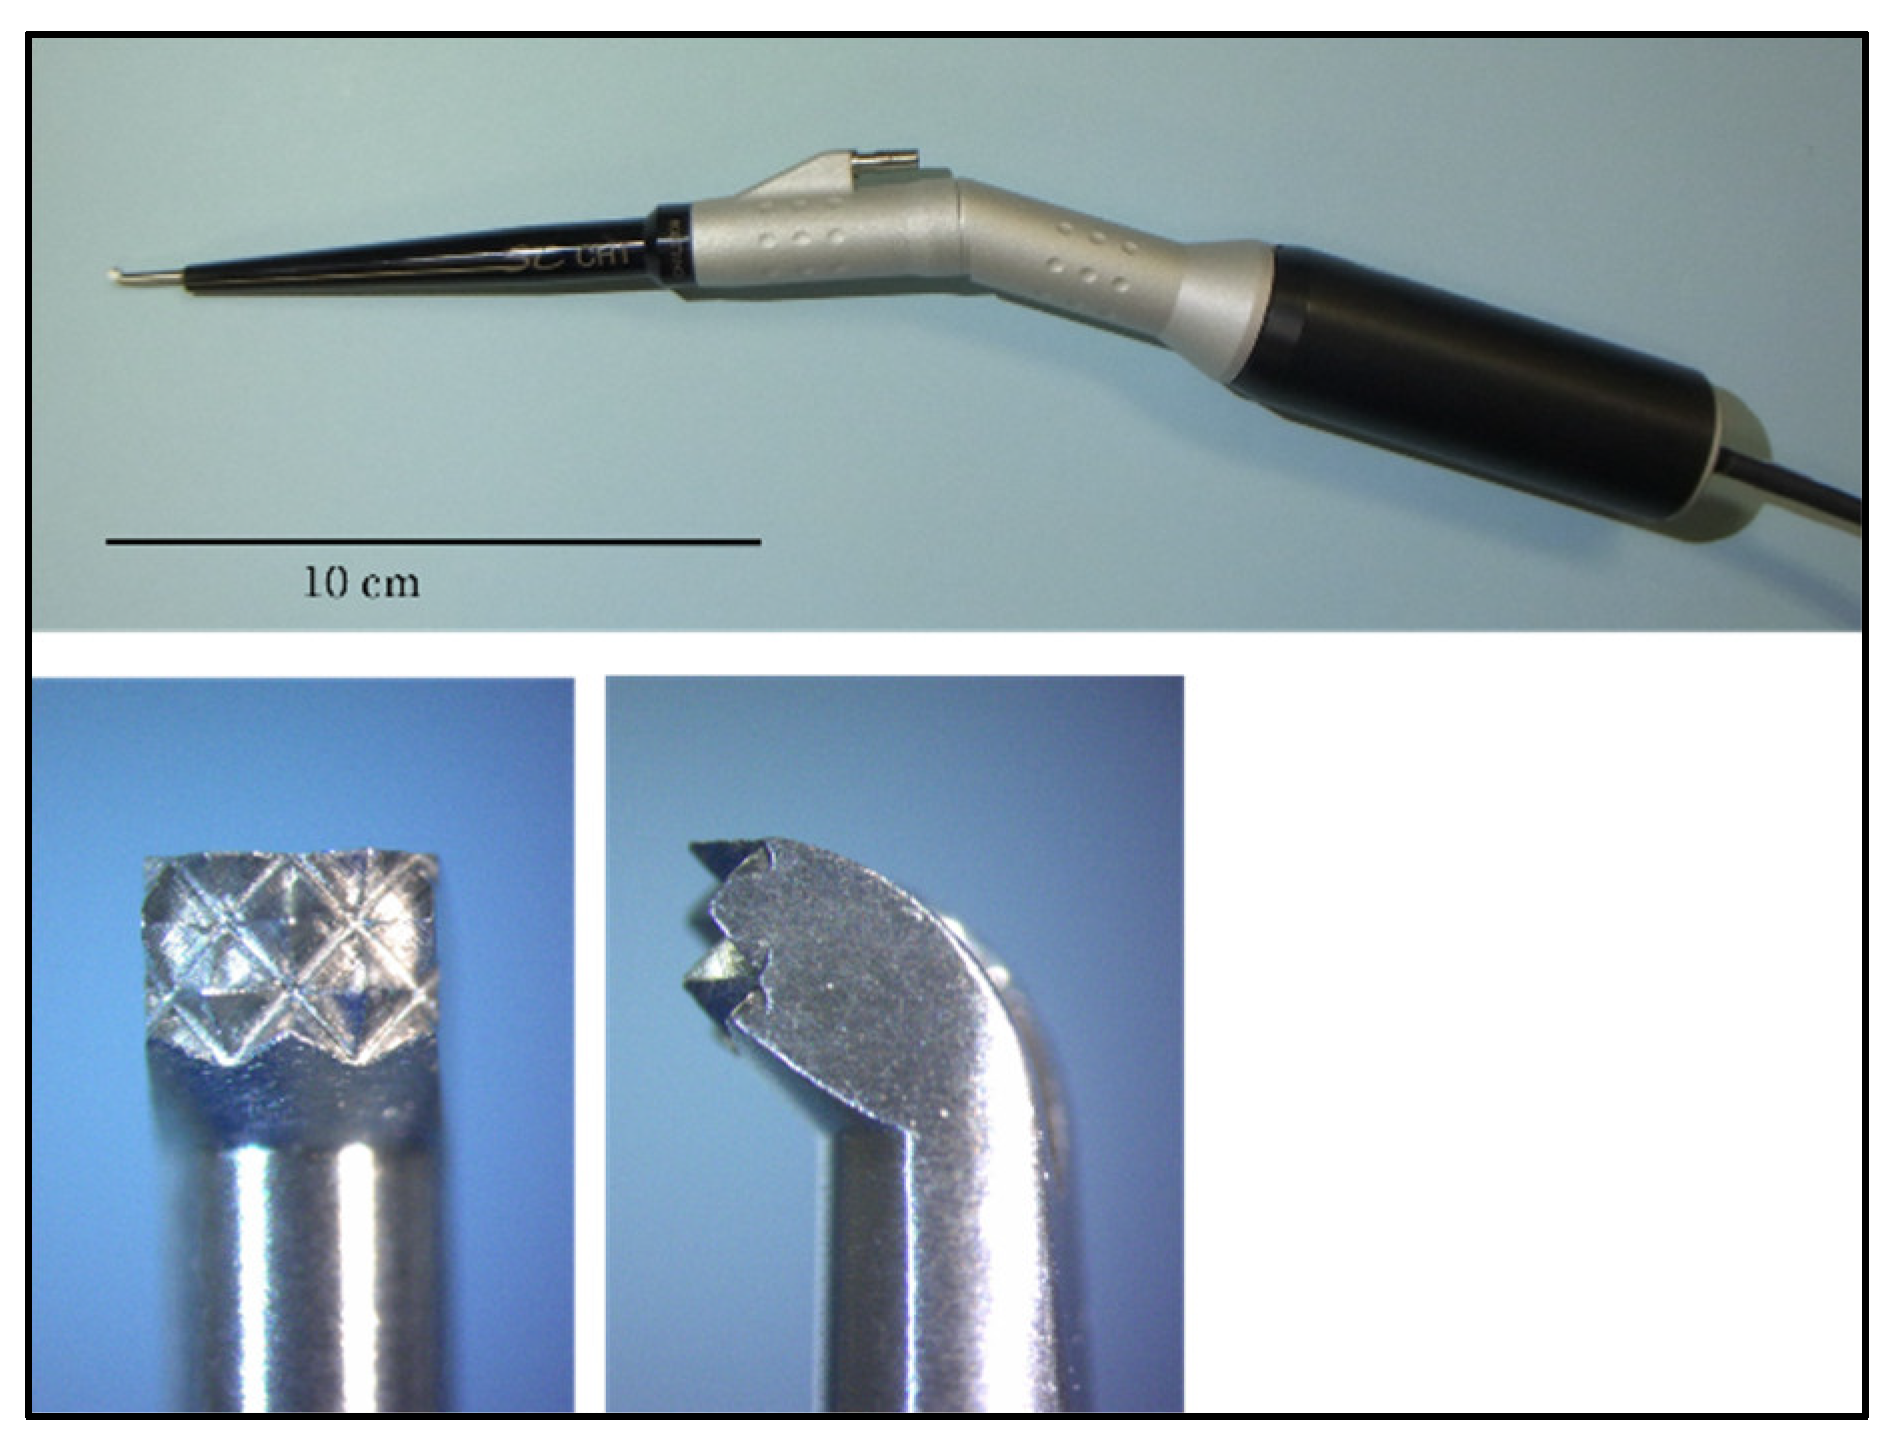 Veterinary Sciences | Free Full-Text | Dural Changes Induced by an Ultrasonic  Bone Curette in an Excised Porcine Spinal Cord